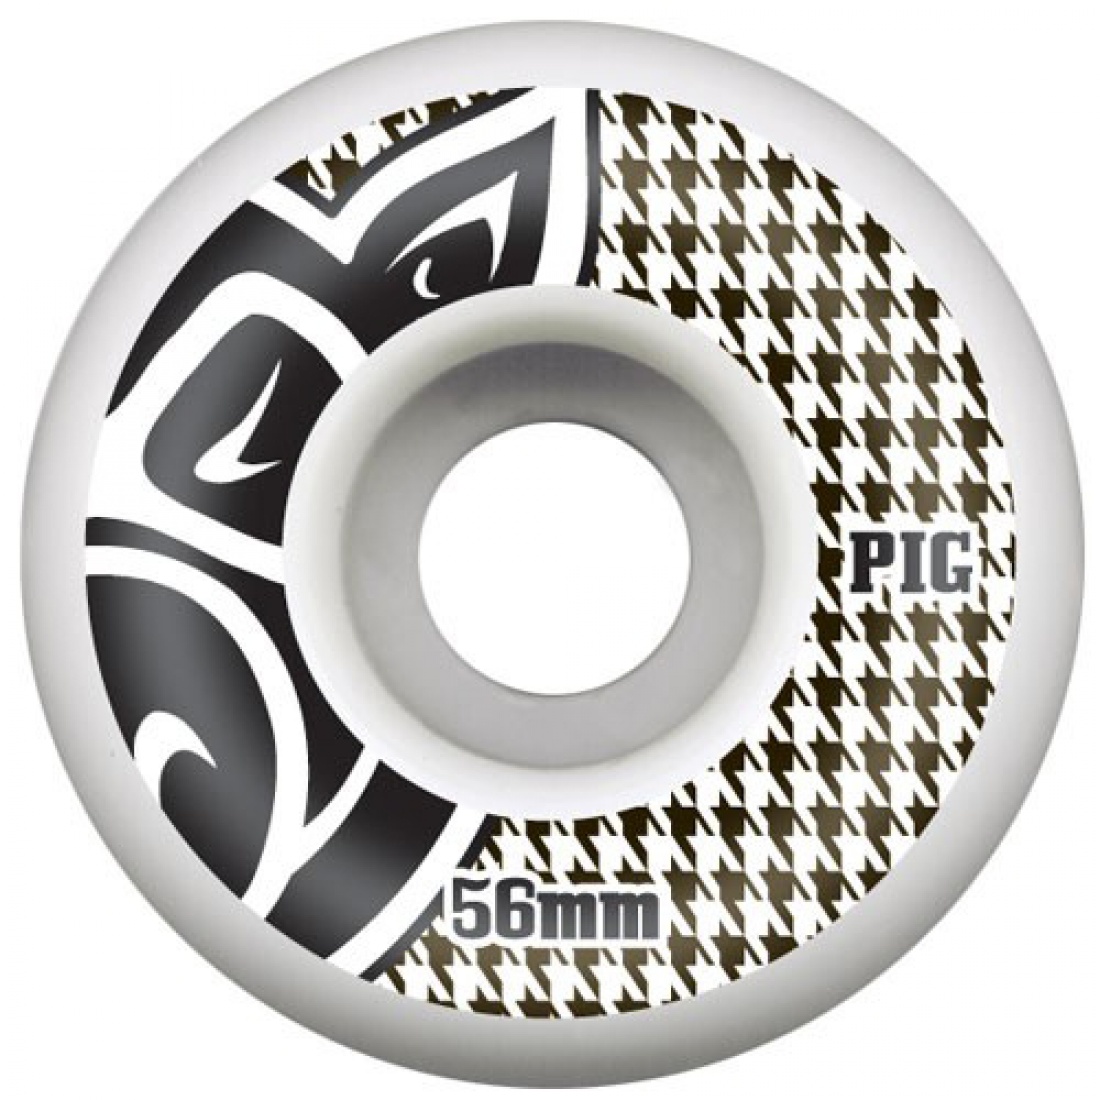 PIG-Houndstooth White 56MM Wheels (Set of 4)